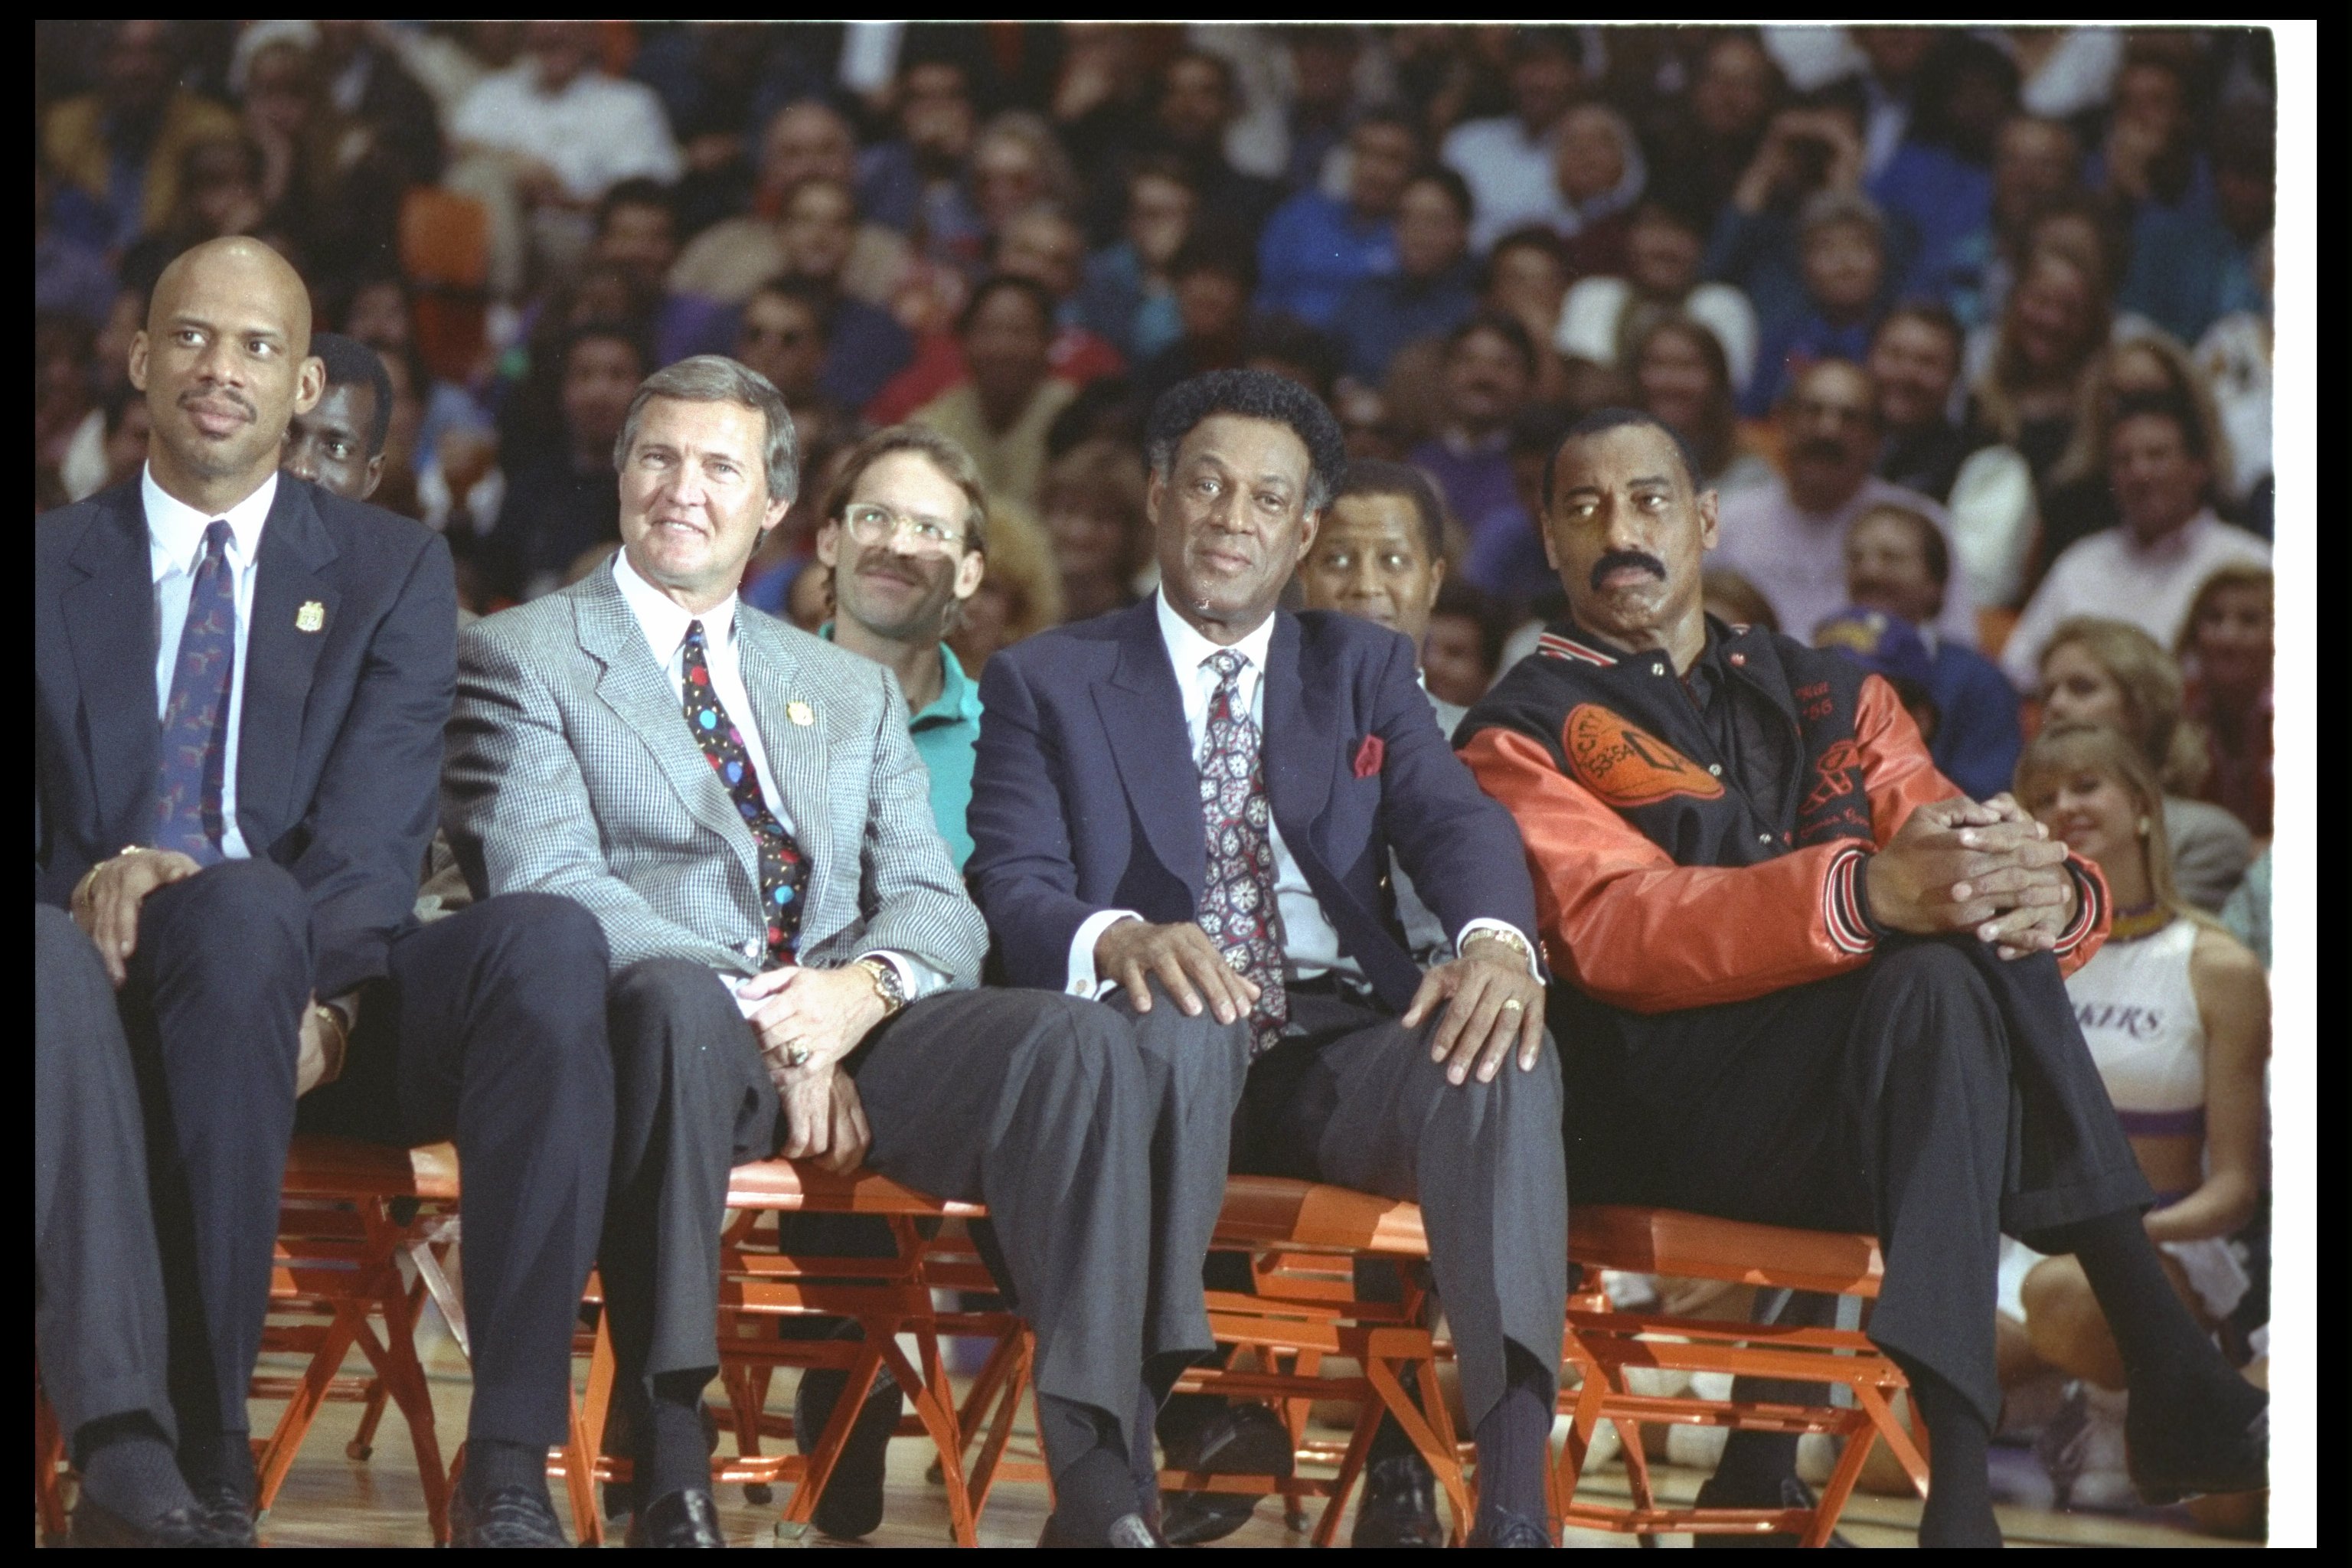 INGLEWOOD, CA - FEBRUARY 16:  Kareem Abdul-Jabbar, Jerry West, Elgin Baylor and Wilt Chamberlain sit on the court during Earvin 'Magic' Johnson's retirement ceremony from the Los Angeles Lakers on February 16, 1992 at the Great Western Forum in Inglewood,